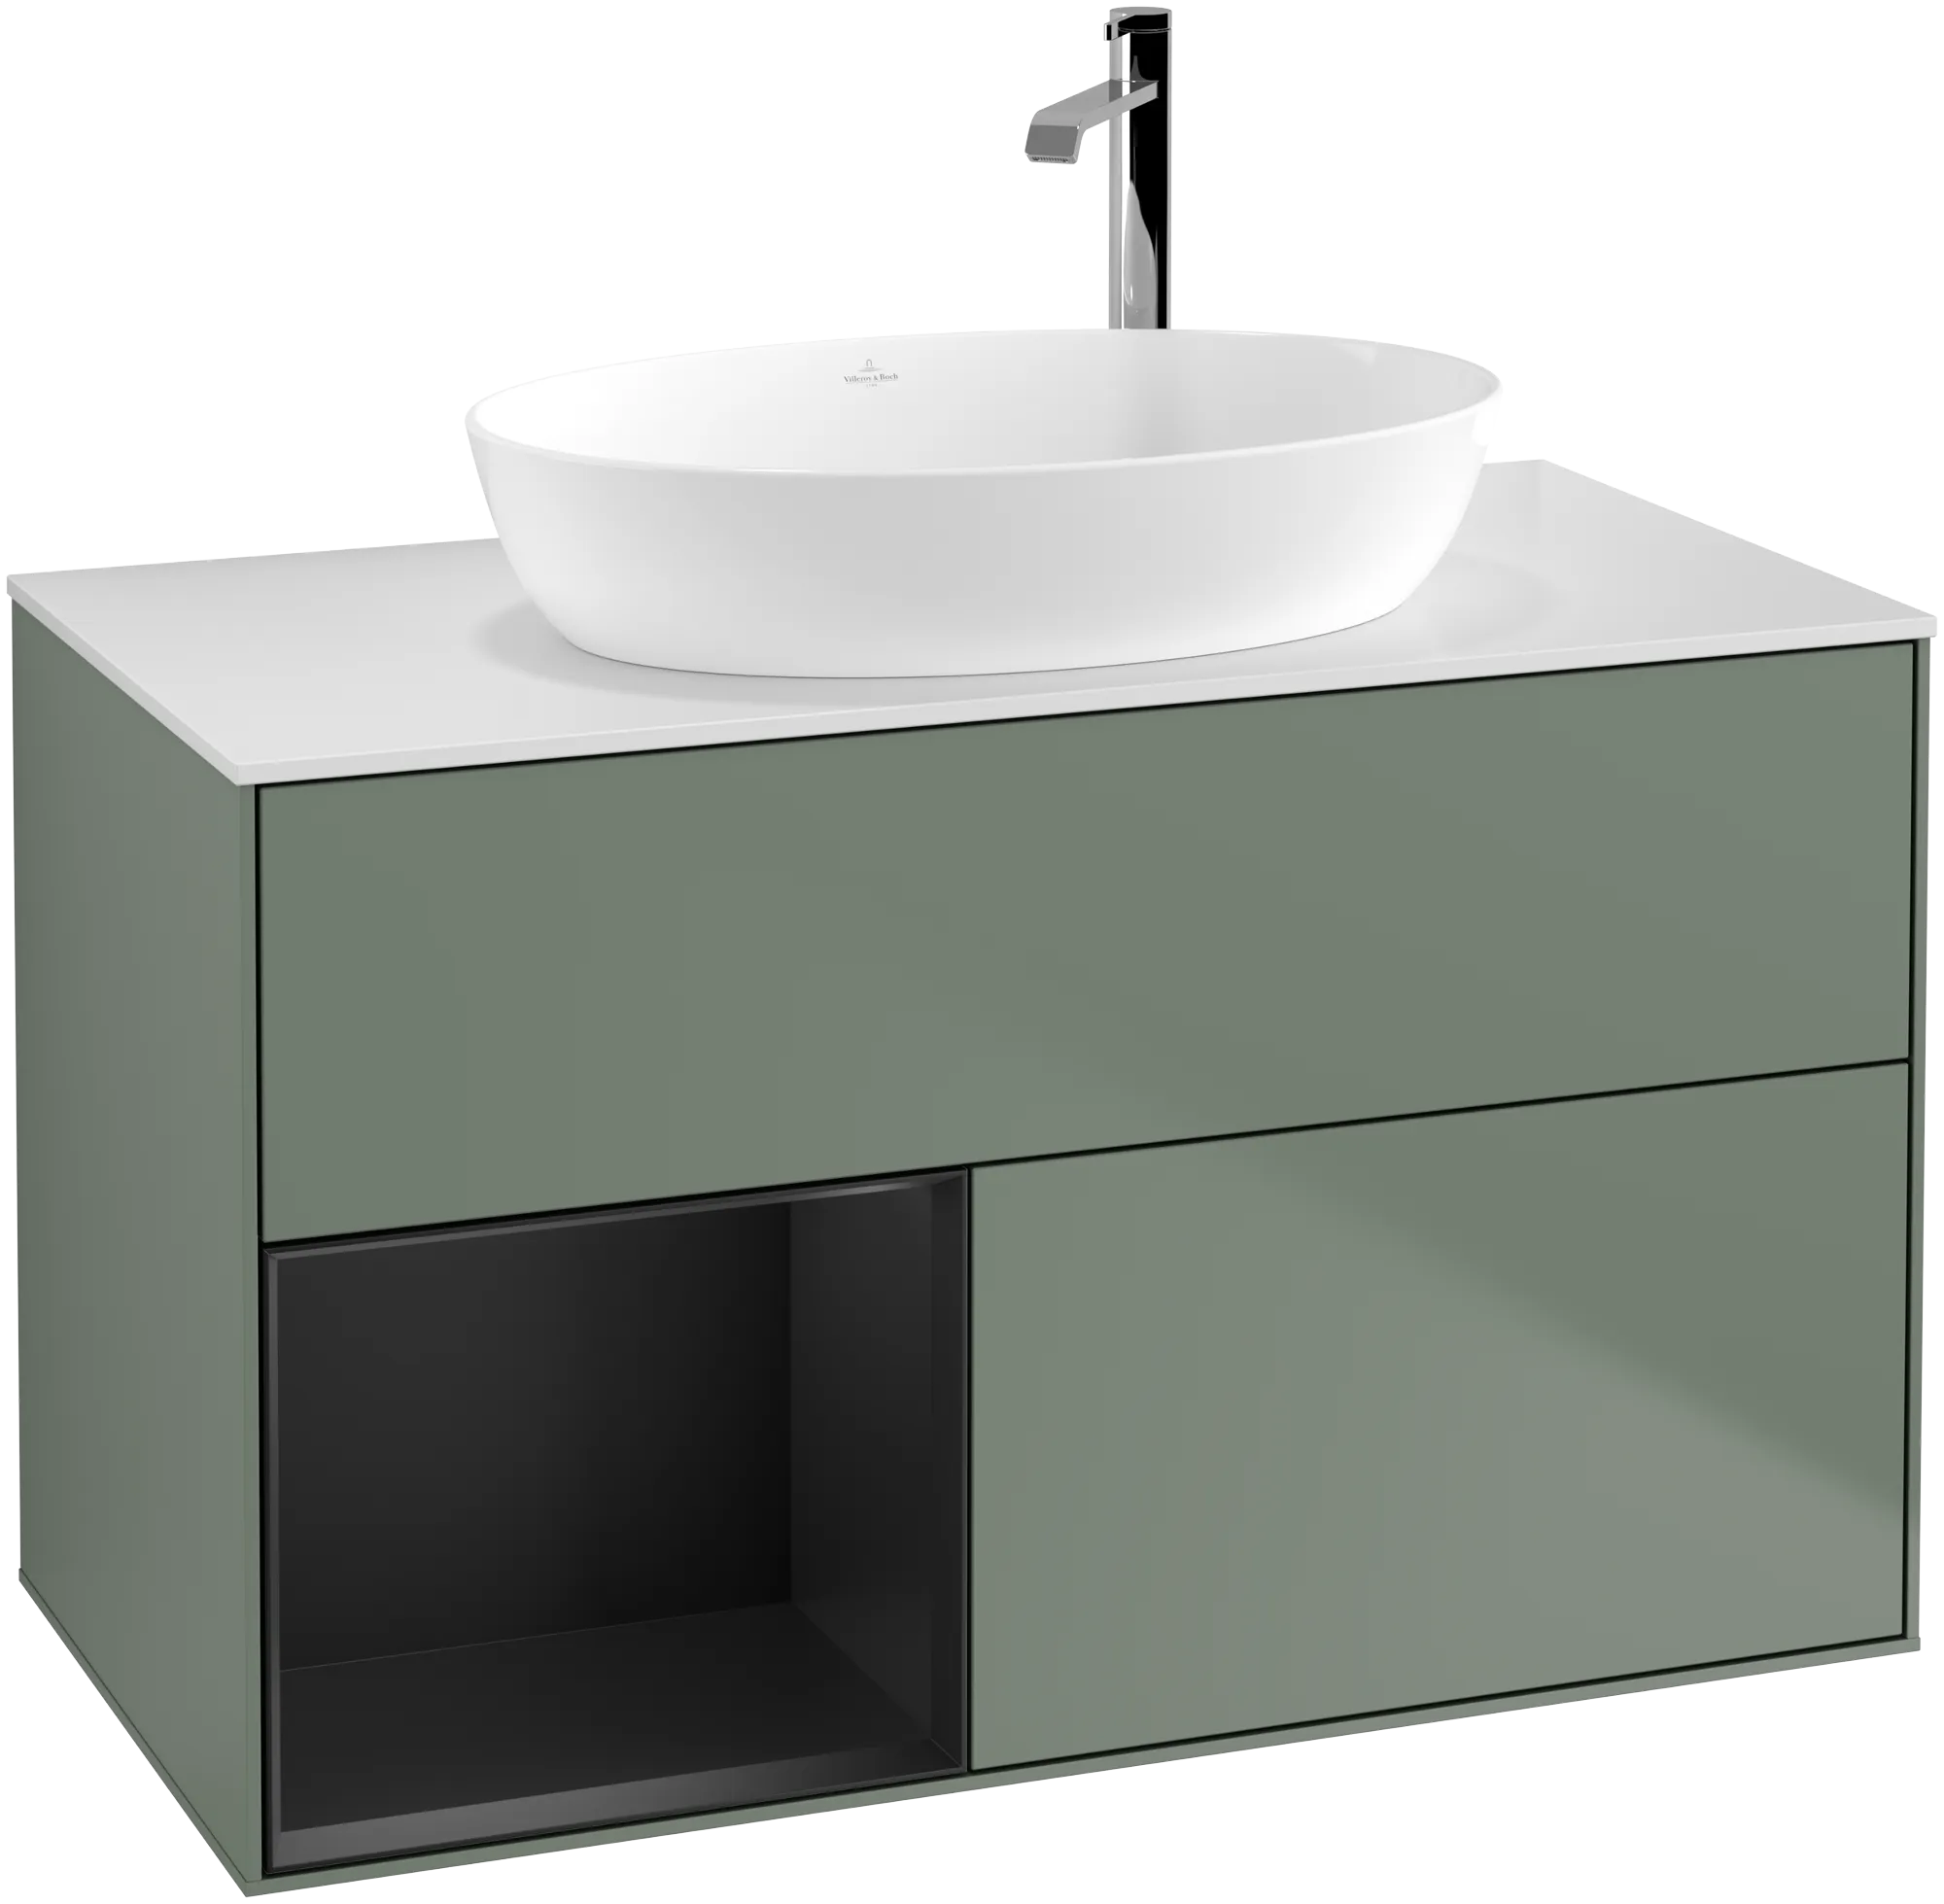 Picture of VILLEROY BOCH Finion Vanity unit, with lighting, 2 pull-out compartments, 1000 x 603 x 501 mm, Olive Matt Lacquer / Black Matt Lacquer / Glass White Matt #G891PDGM